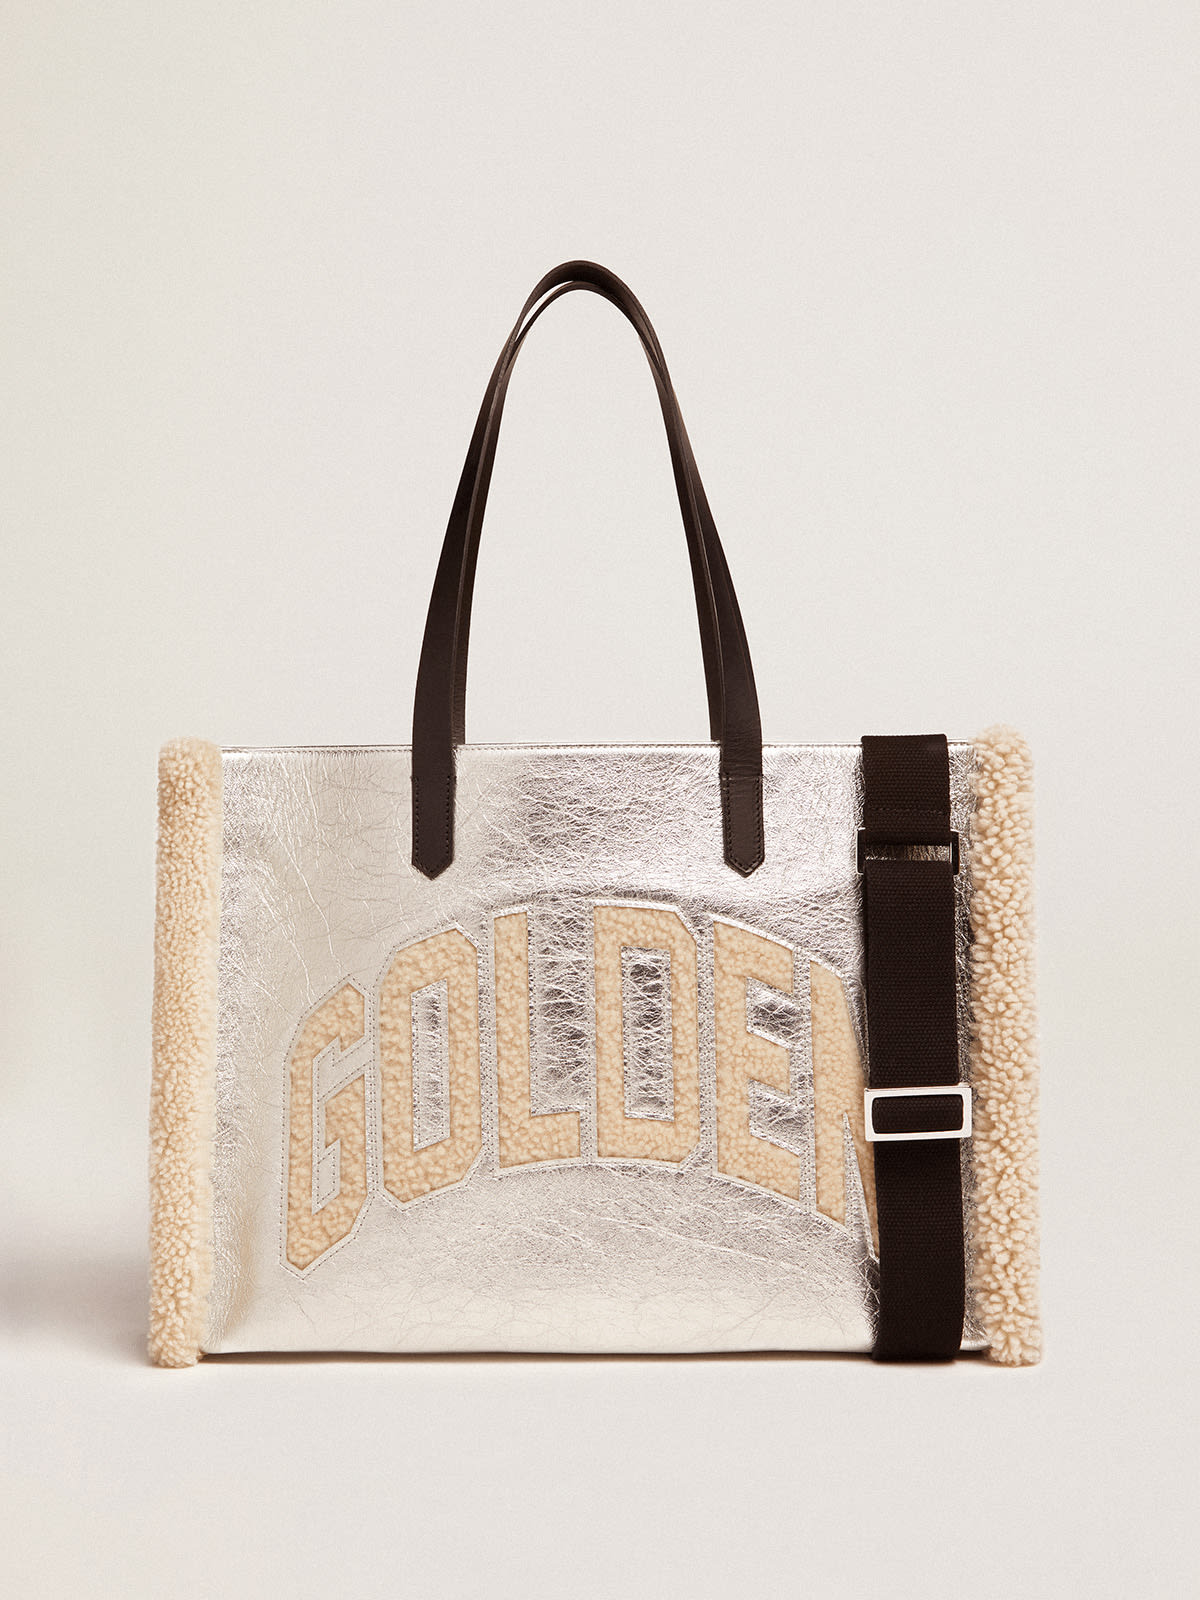 Golden Goose - Women's California Bag East-West in silver leather and wool inserts in 